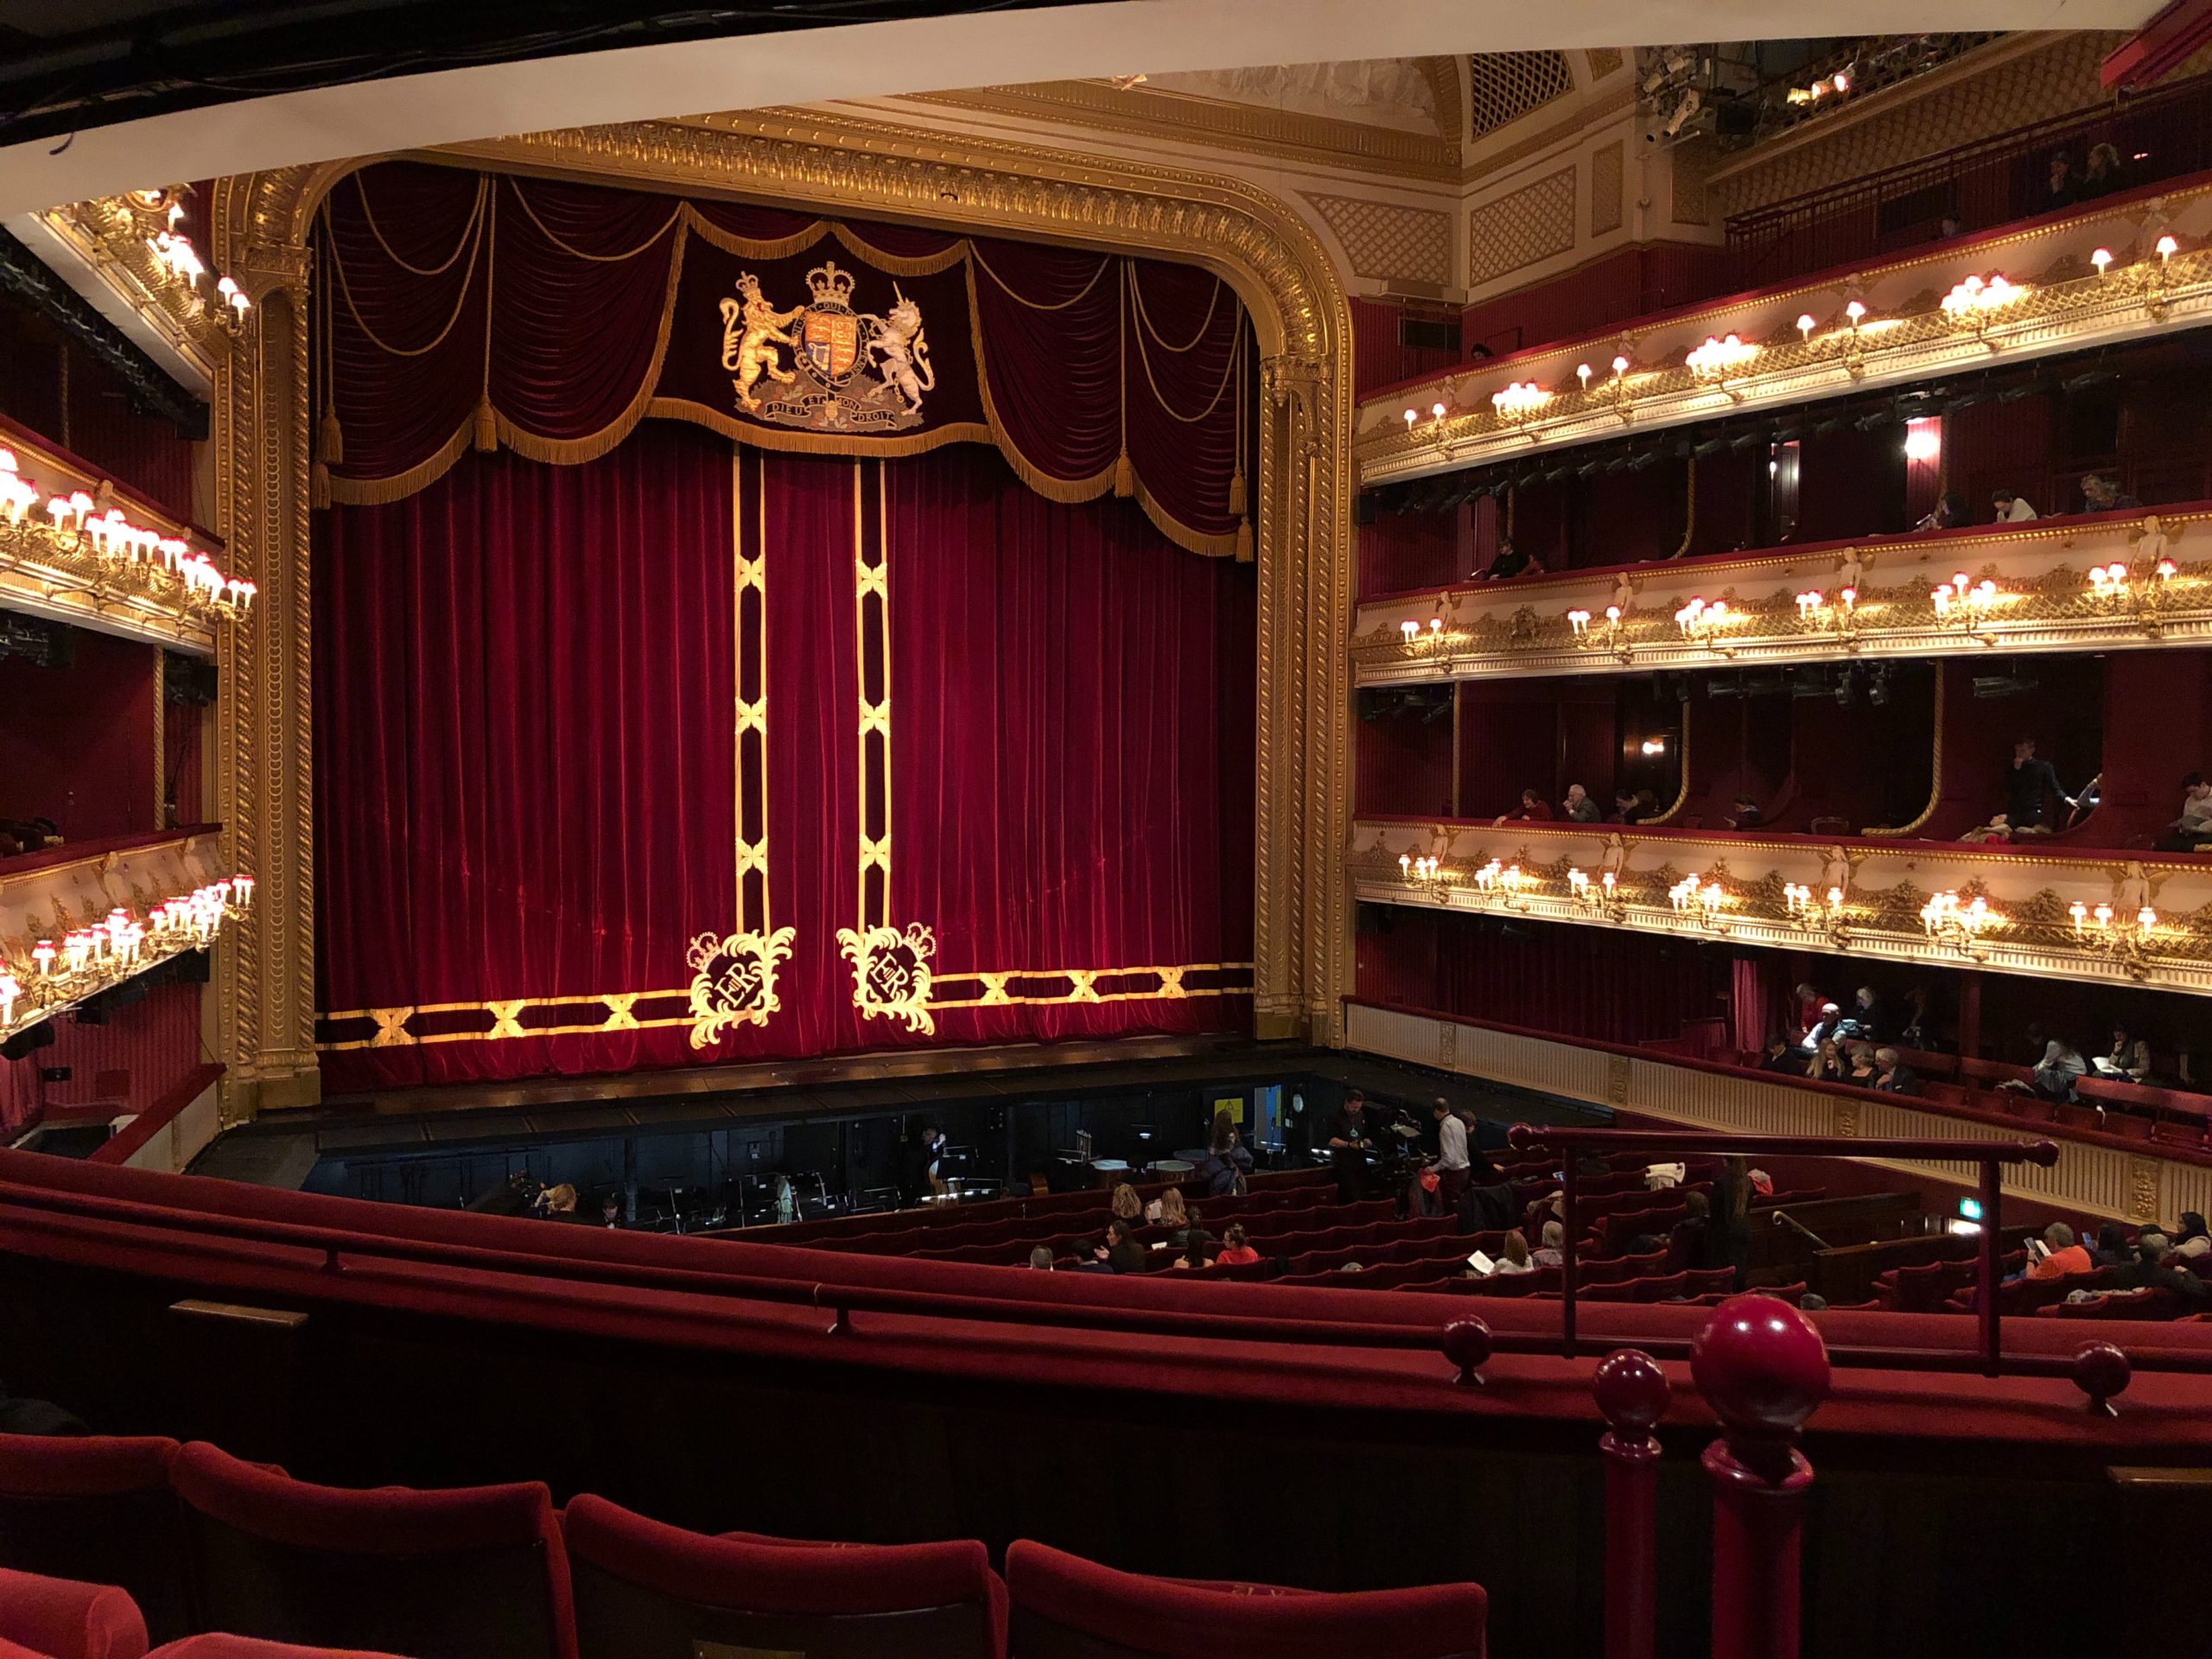 Inside the Royal Opera House in London